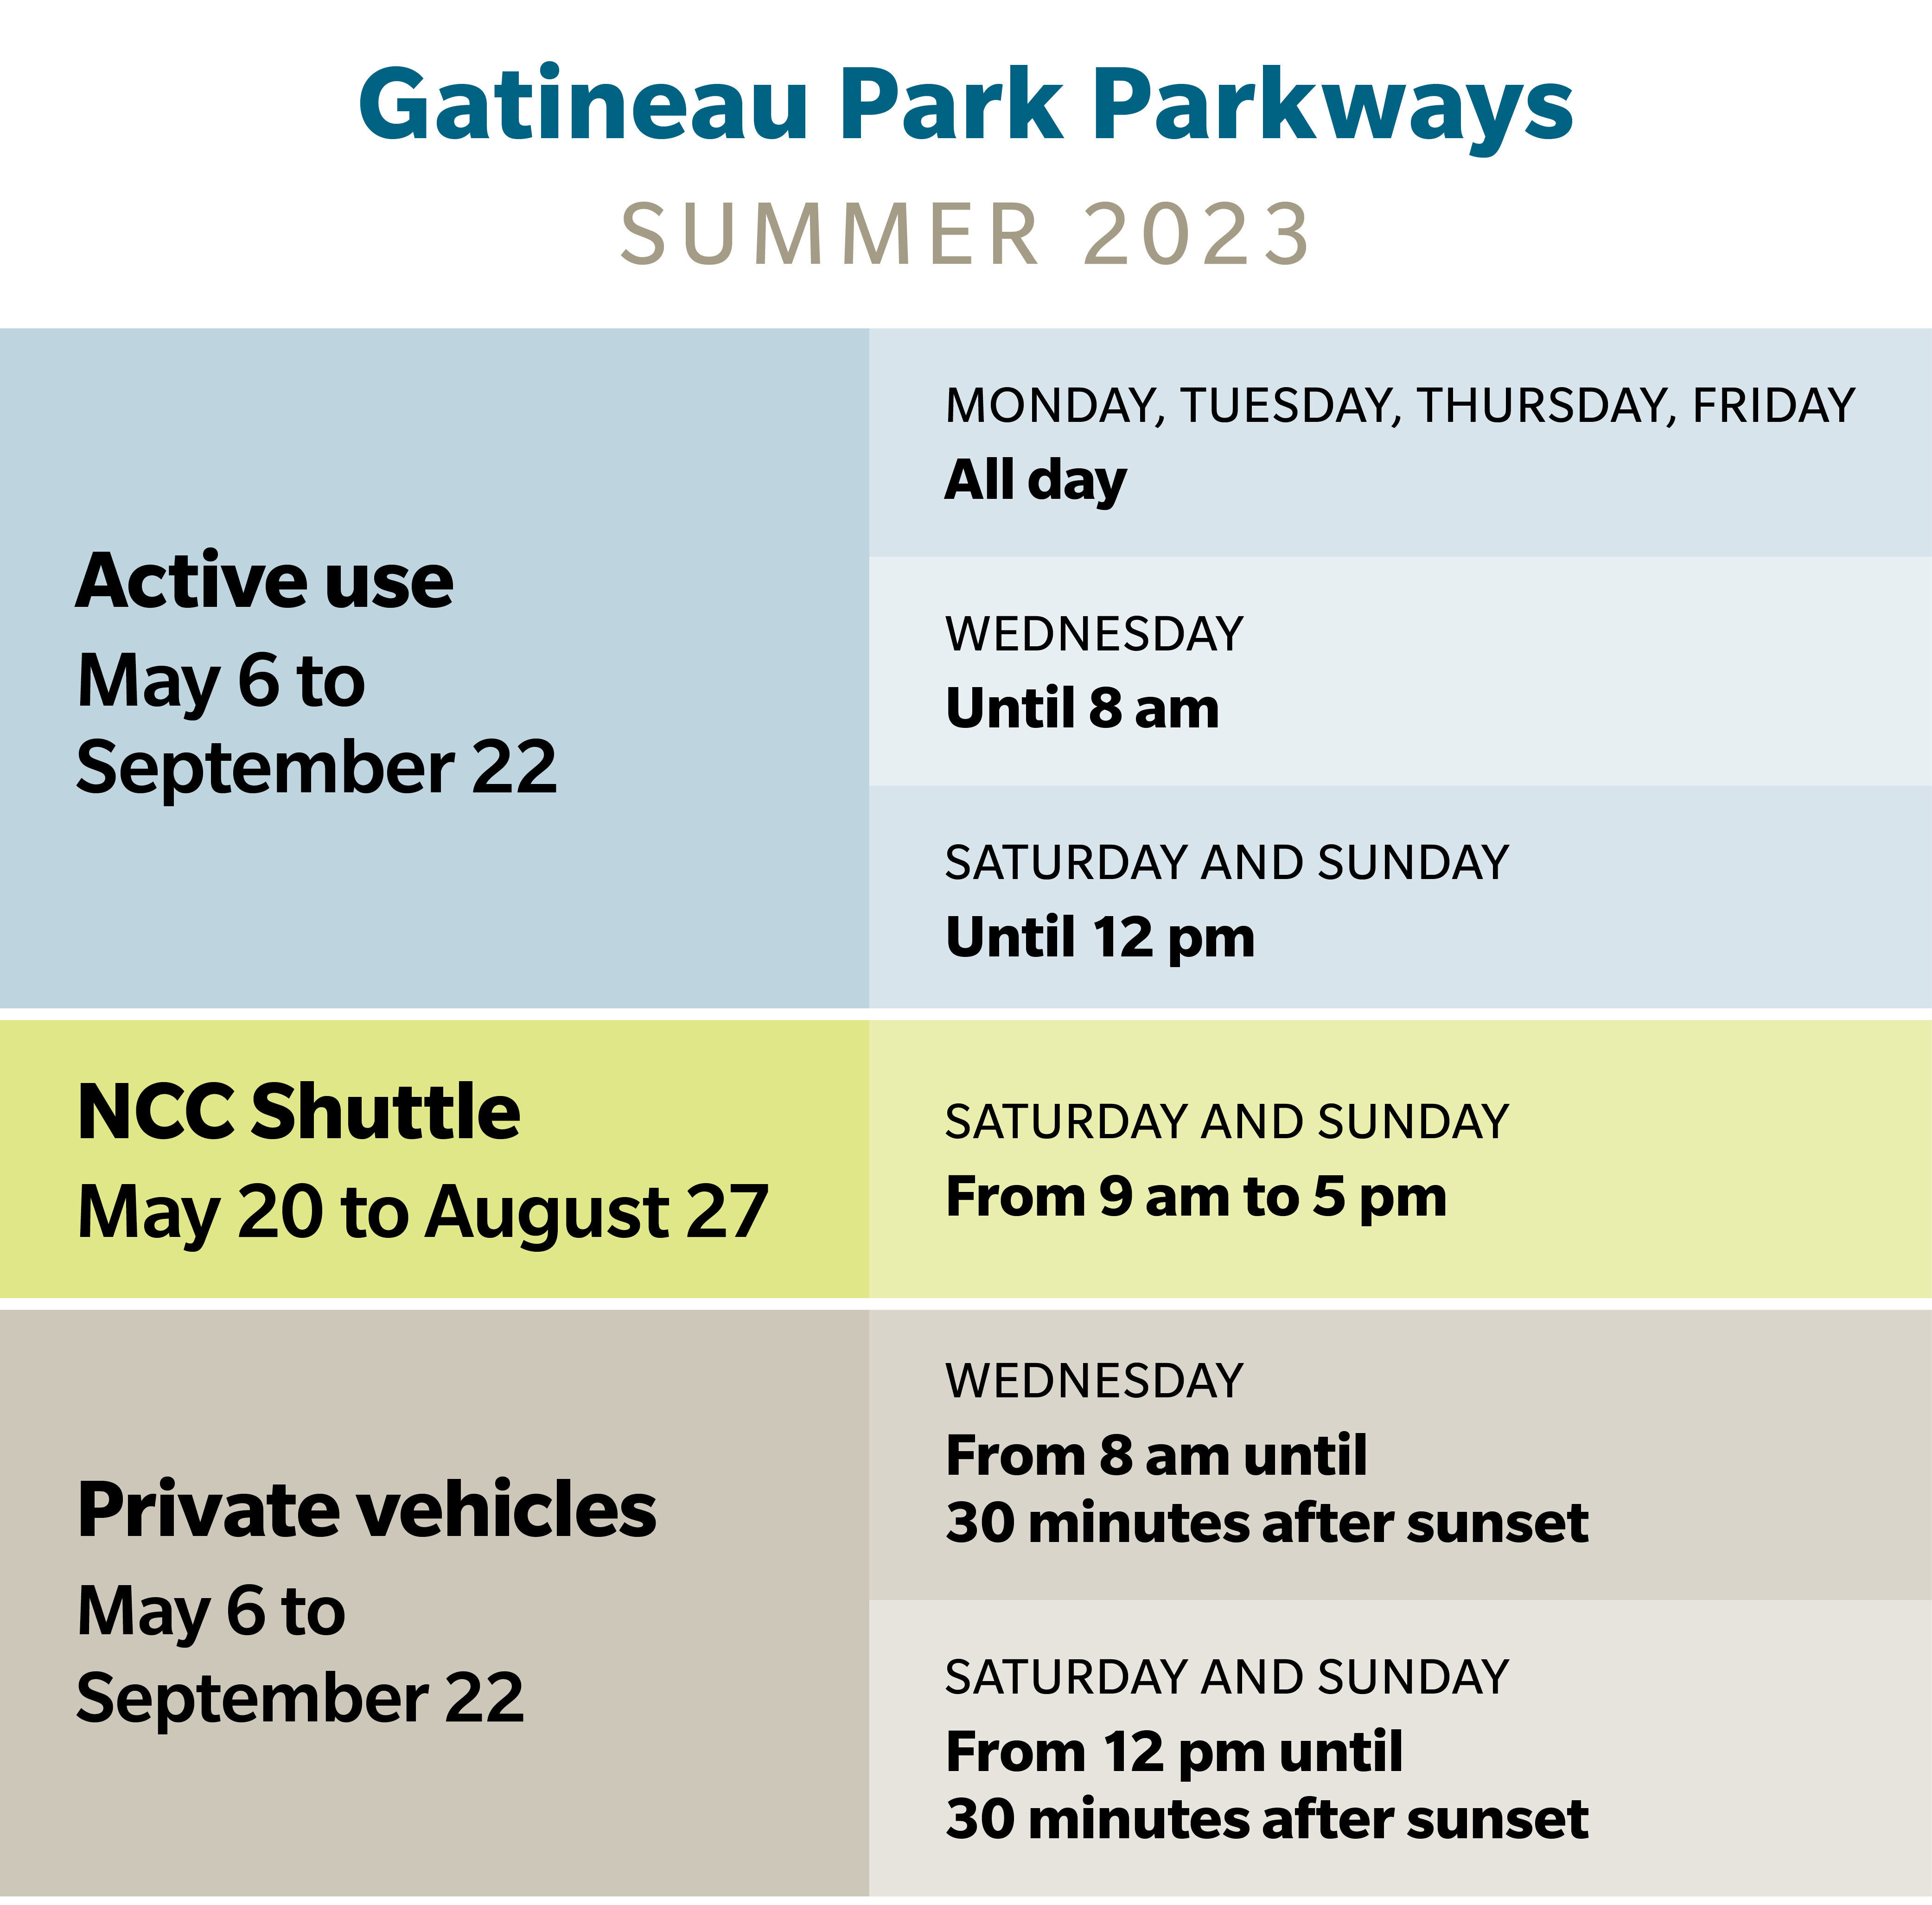 Gatineau Park Road for Active Use